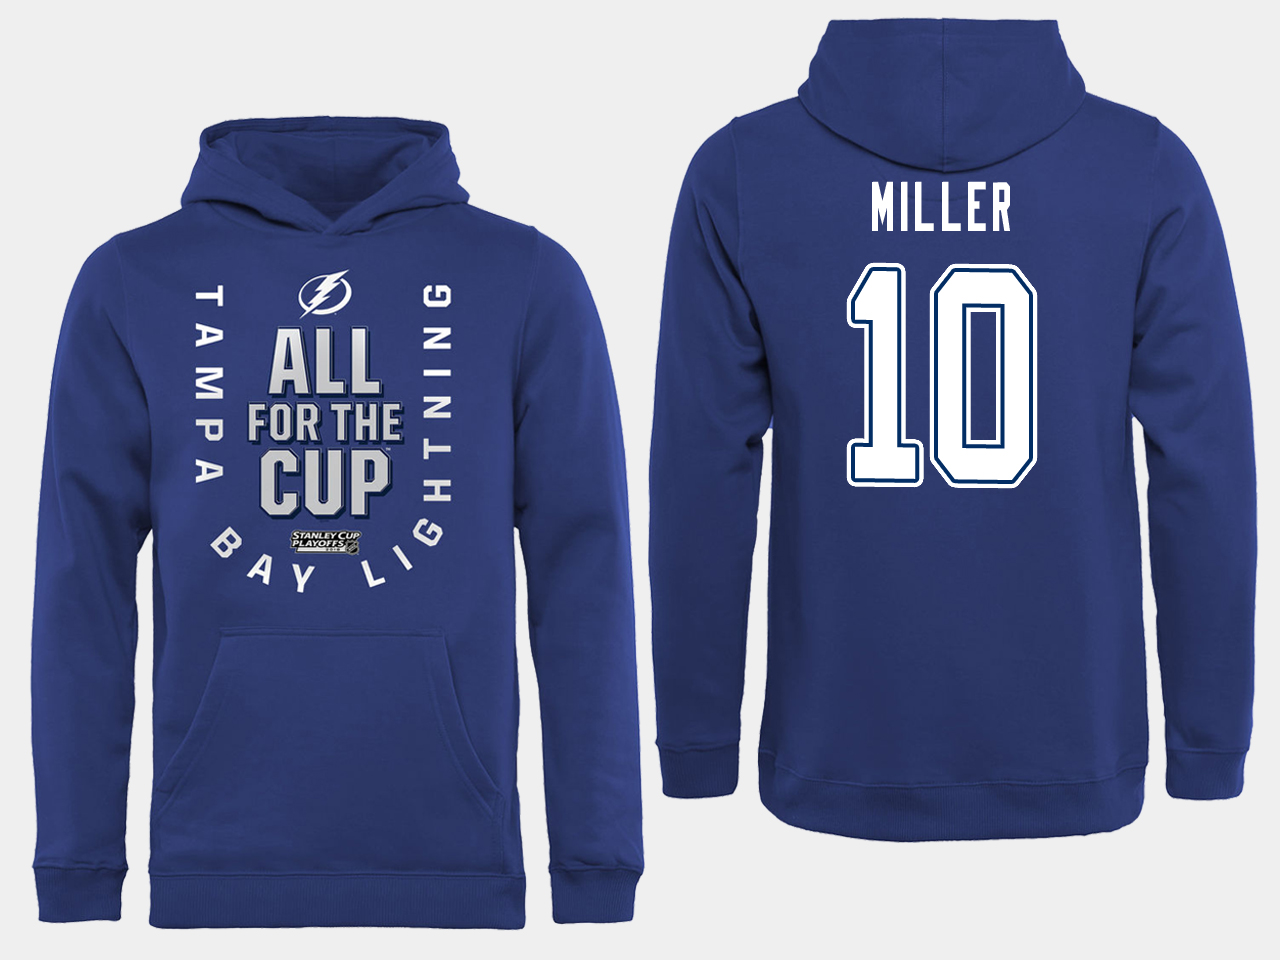 NHL Men adidas Tampa Bay Lightning 10 Miller blue All for the Cup Hoodie